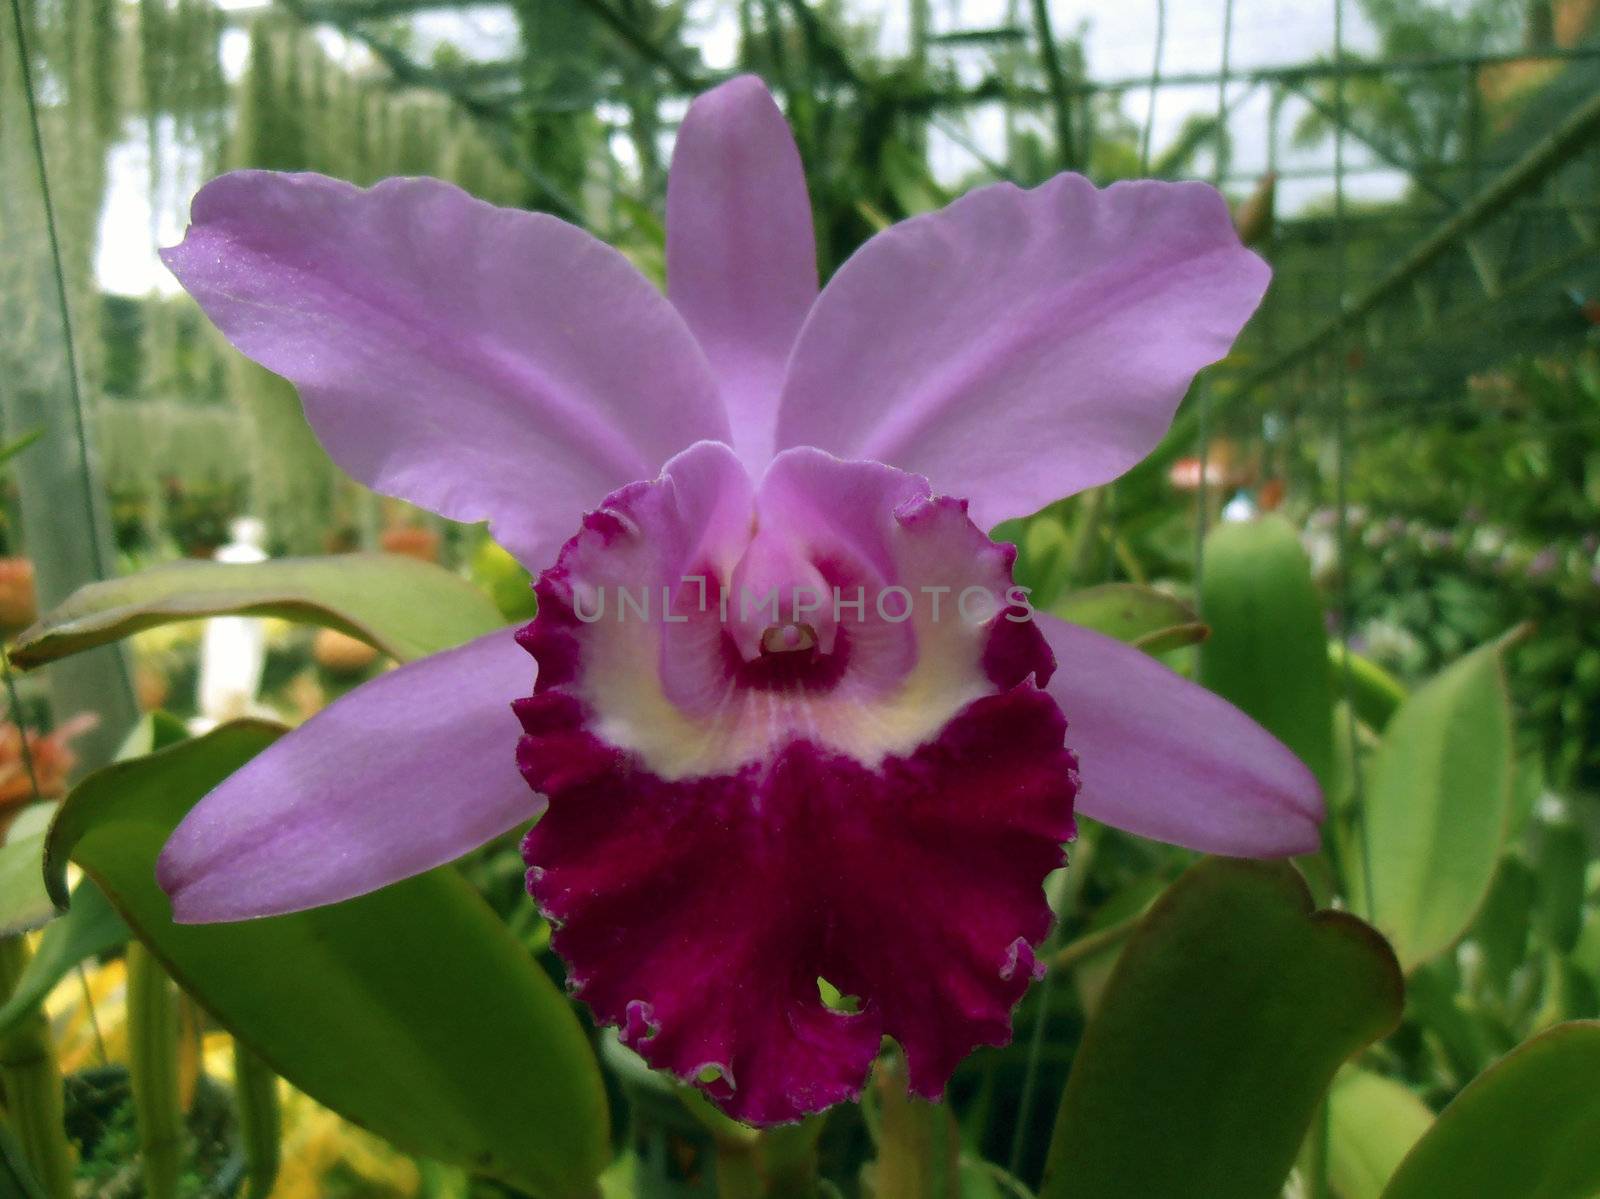 The Orchid flower in the greenhouse. Chonburi, Thailand, 2012. The Orchidaceae or orchid family is a diverse and widespread family of flowering plants with colorful and fragrant blooms.